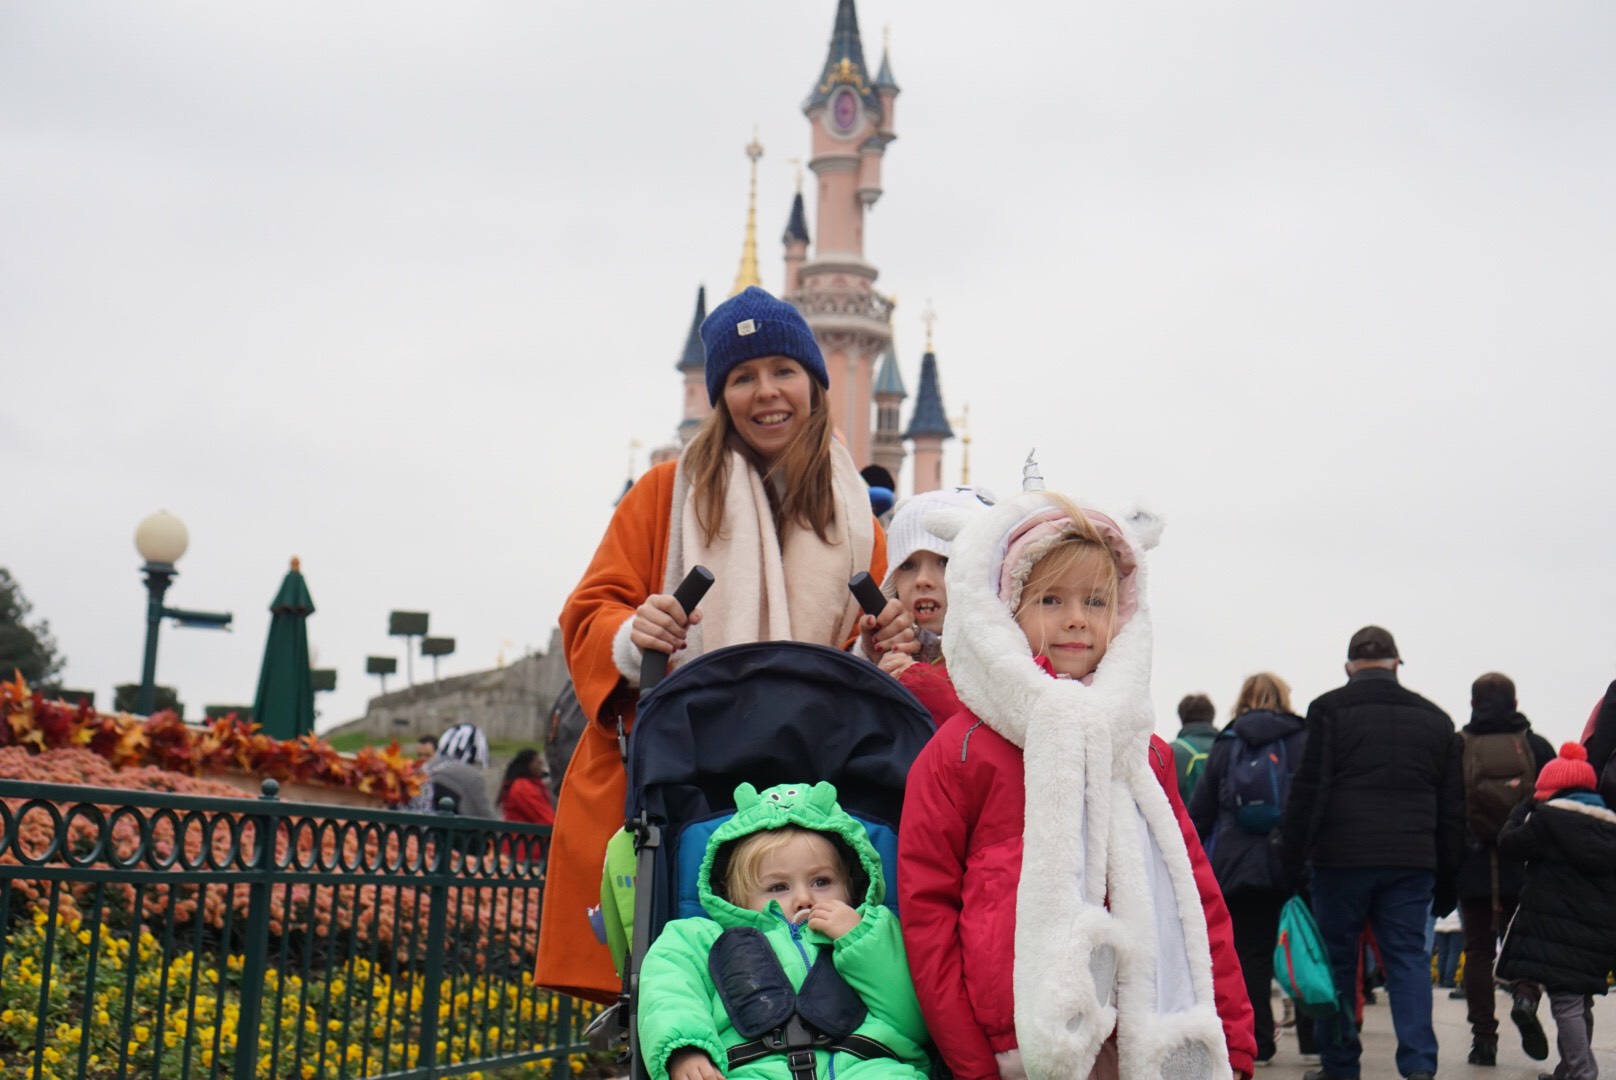 visiting Disneyland Paris for the first time